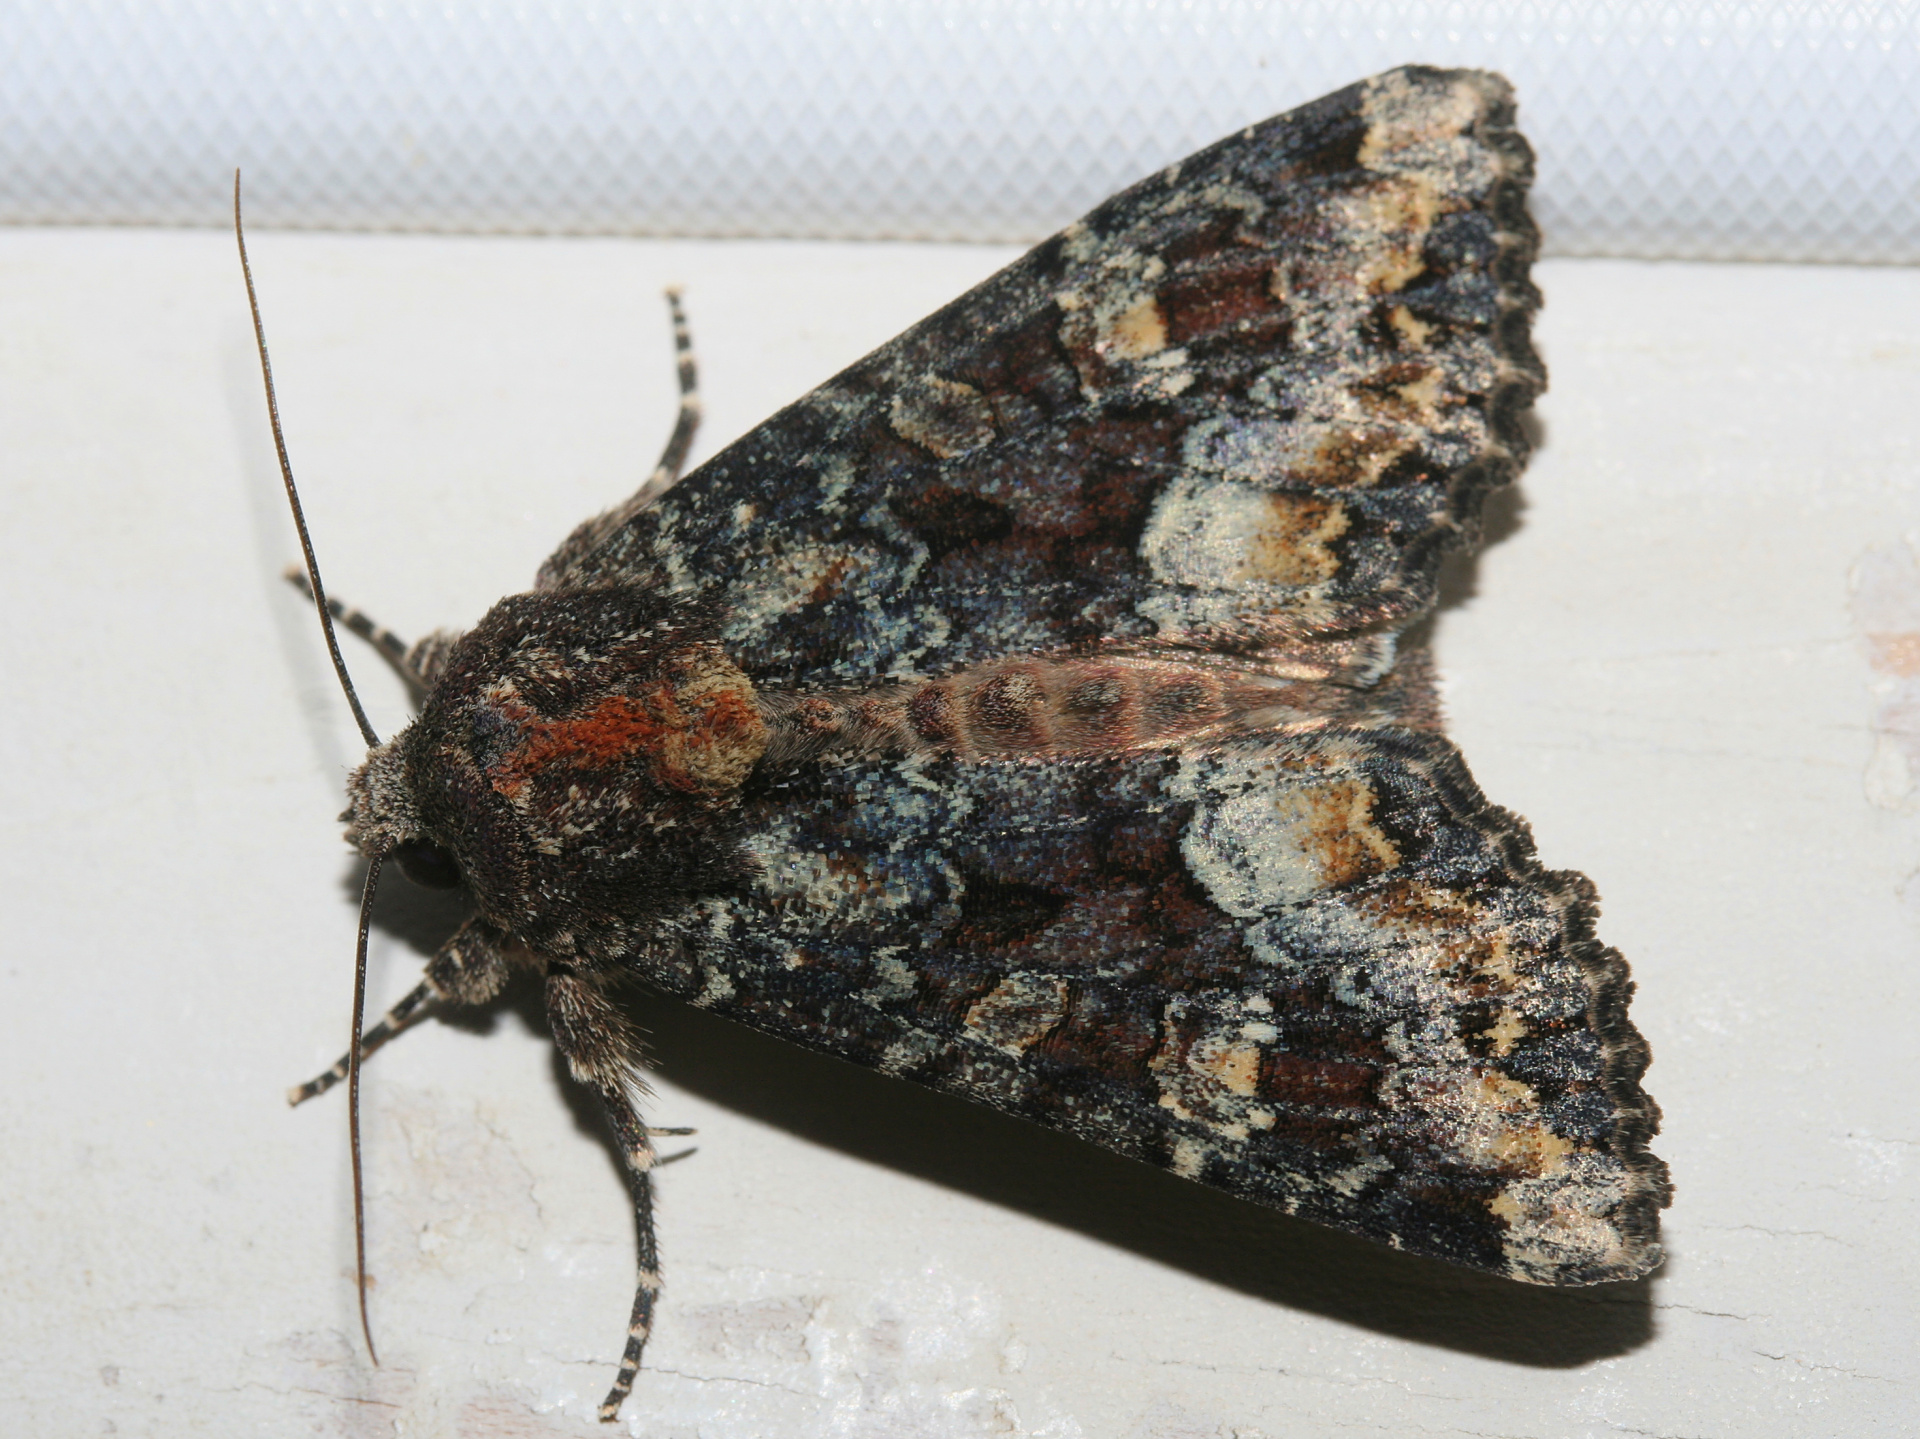 Apamea amputatrix (Travels » US Trip 2: Cheyenne Epic » Animals » Insects » Butterfies and Moths » Noctuidae)